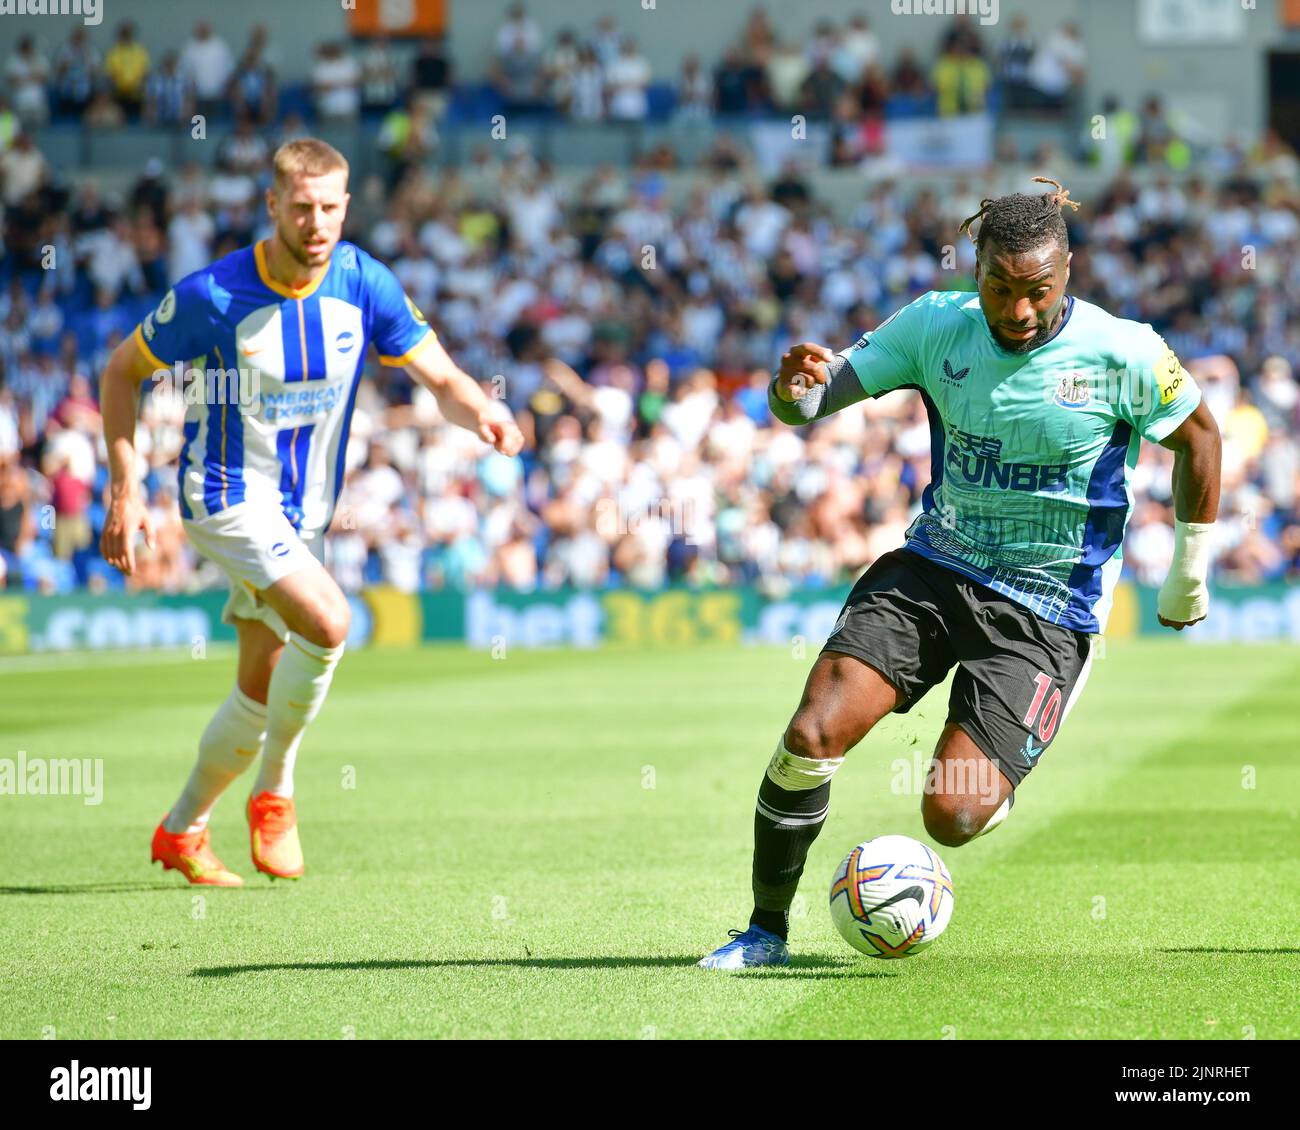 Brighton, UK. 13th Aug, 2022. Allan Saint-Maximin of Newcastle United during the Premier League match between Brighton & Hove Albion and Newcastle United at The Amex on August 13th 2022 in Brighton, England. (Photo by Jeff Mood/phcimages.com) Credit: PHC Images/Alamy Live News Stock Photo